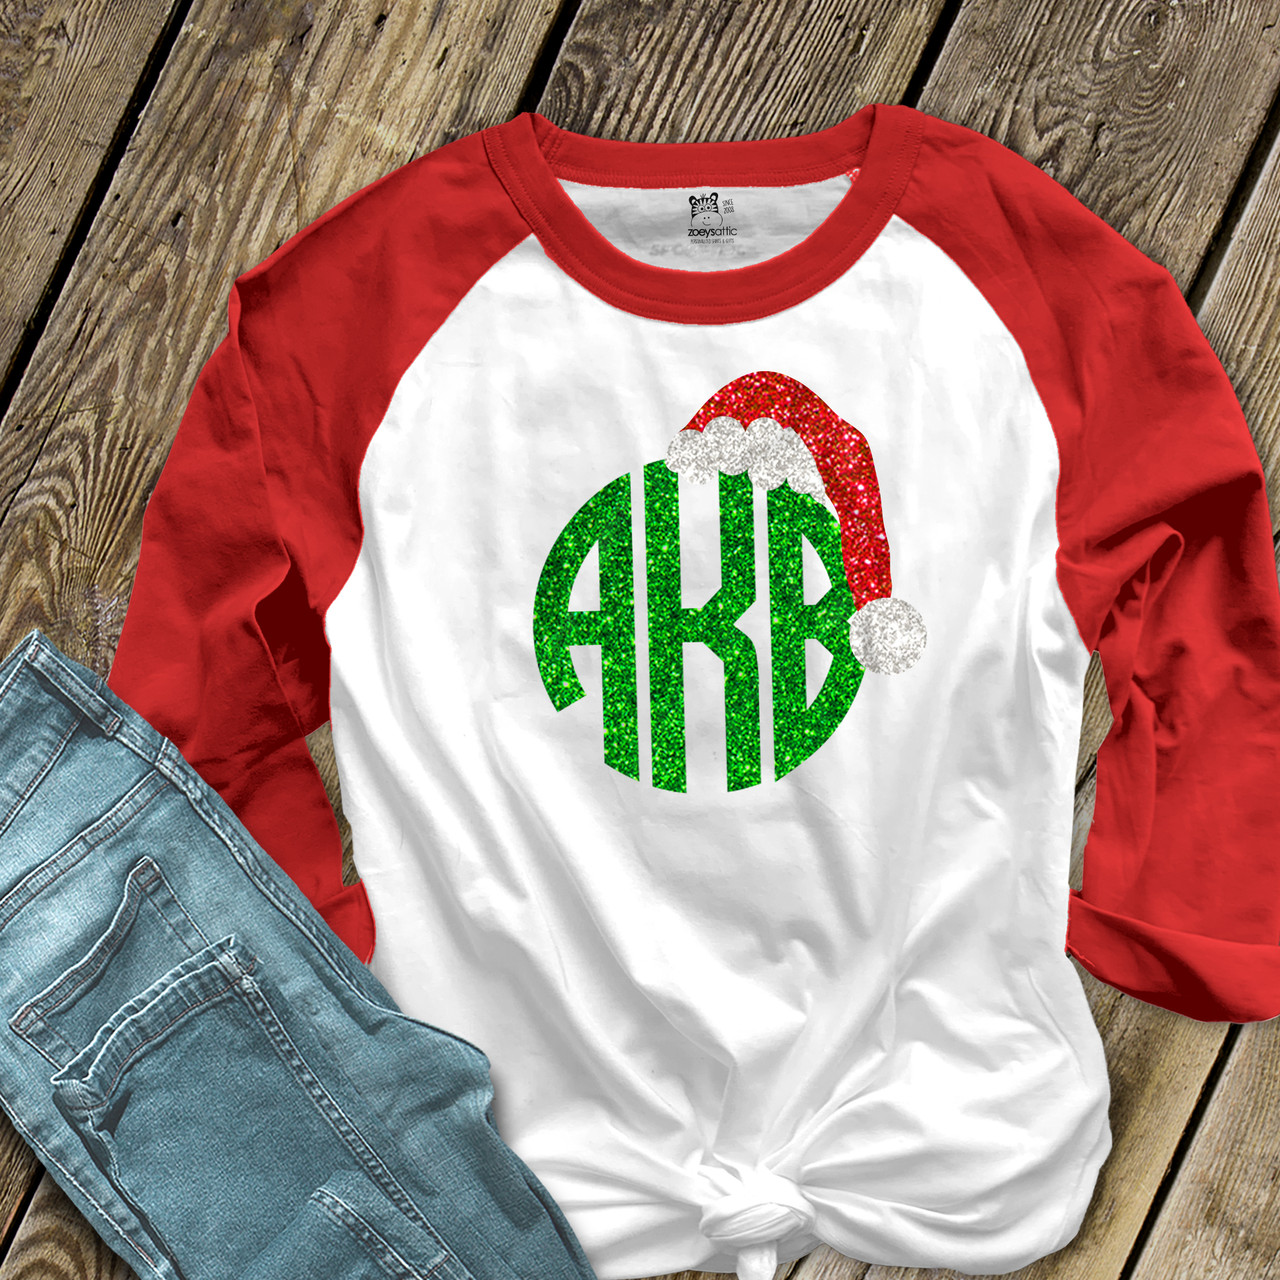 monogram long sleeve fitted shirt